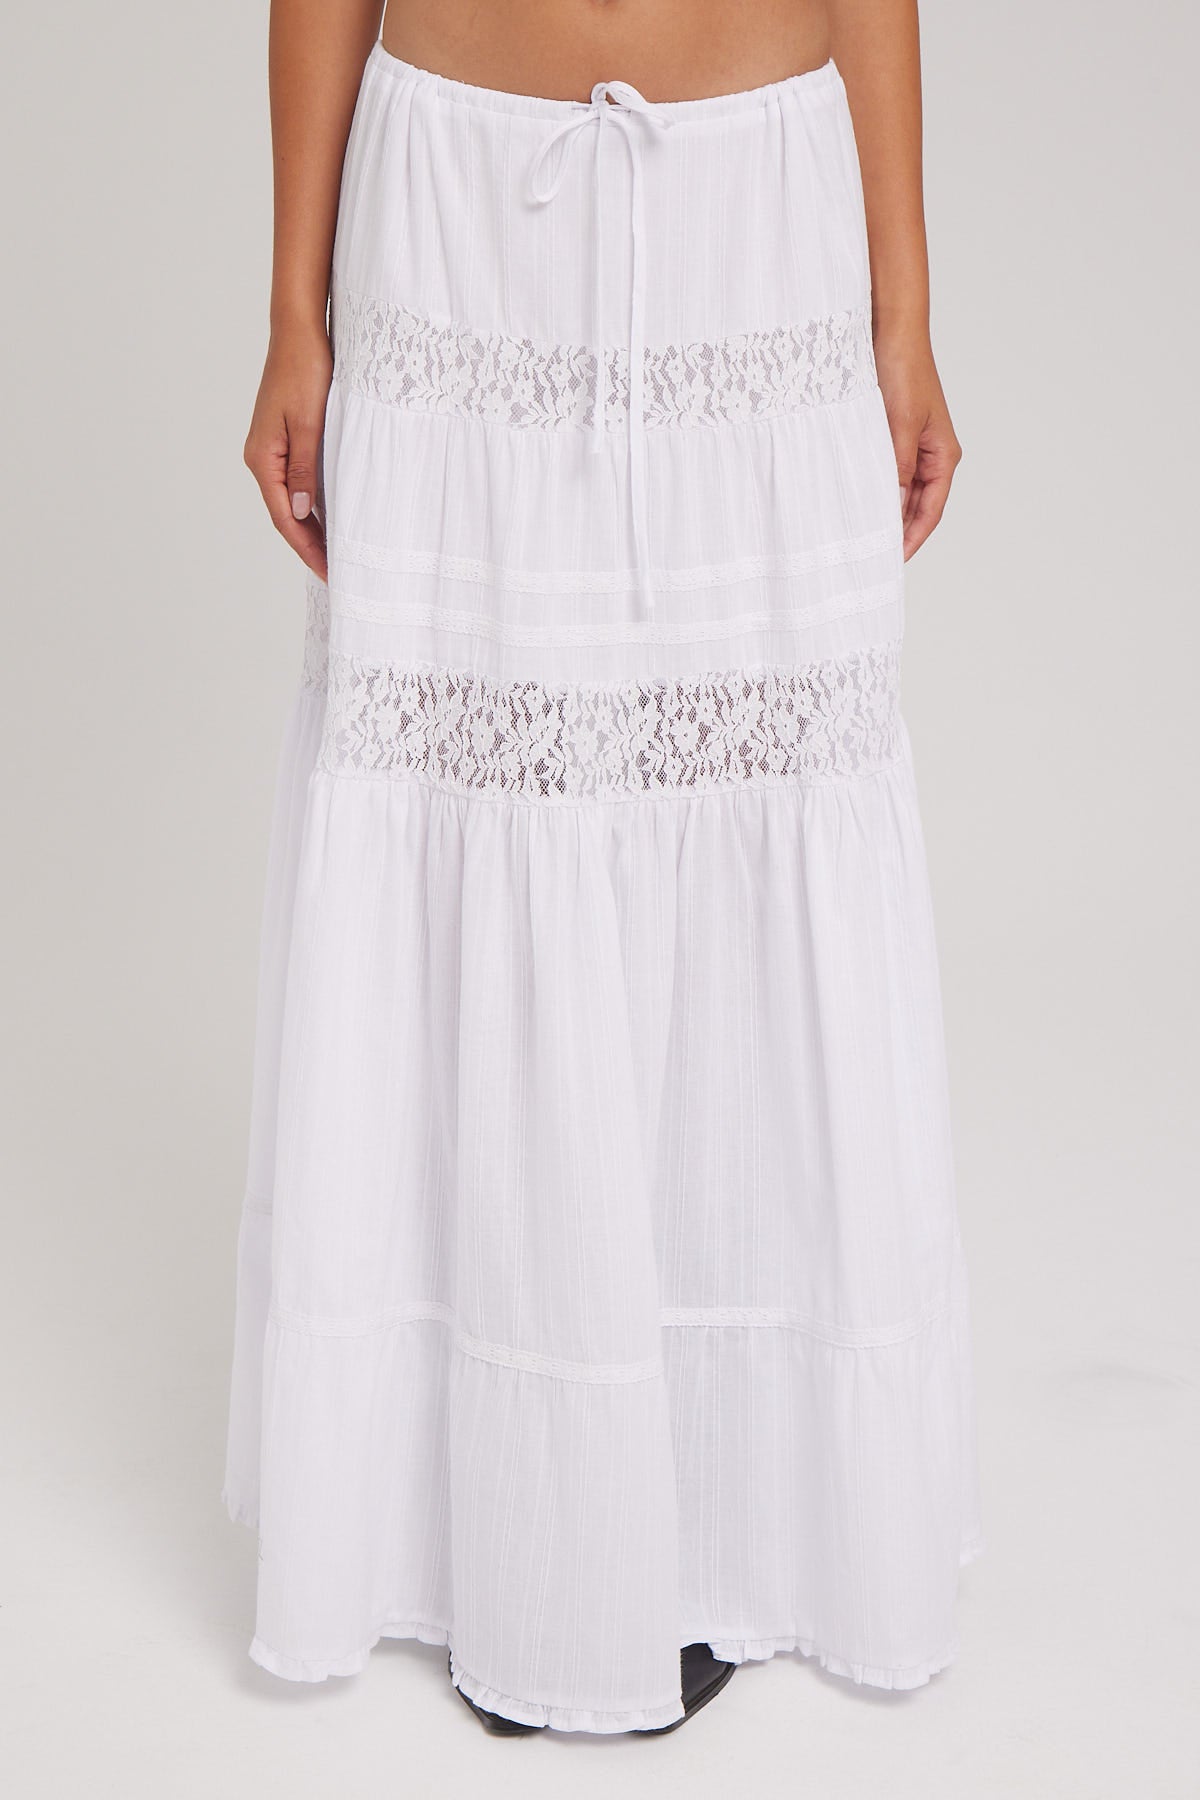 Luck & Trouble Virginia Lace Maxi Skirt White – Universal Store